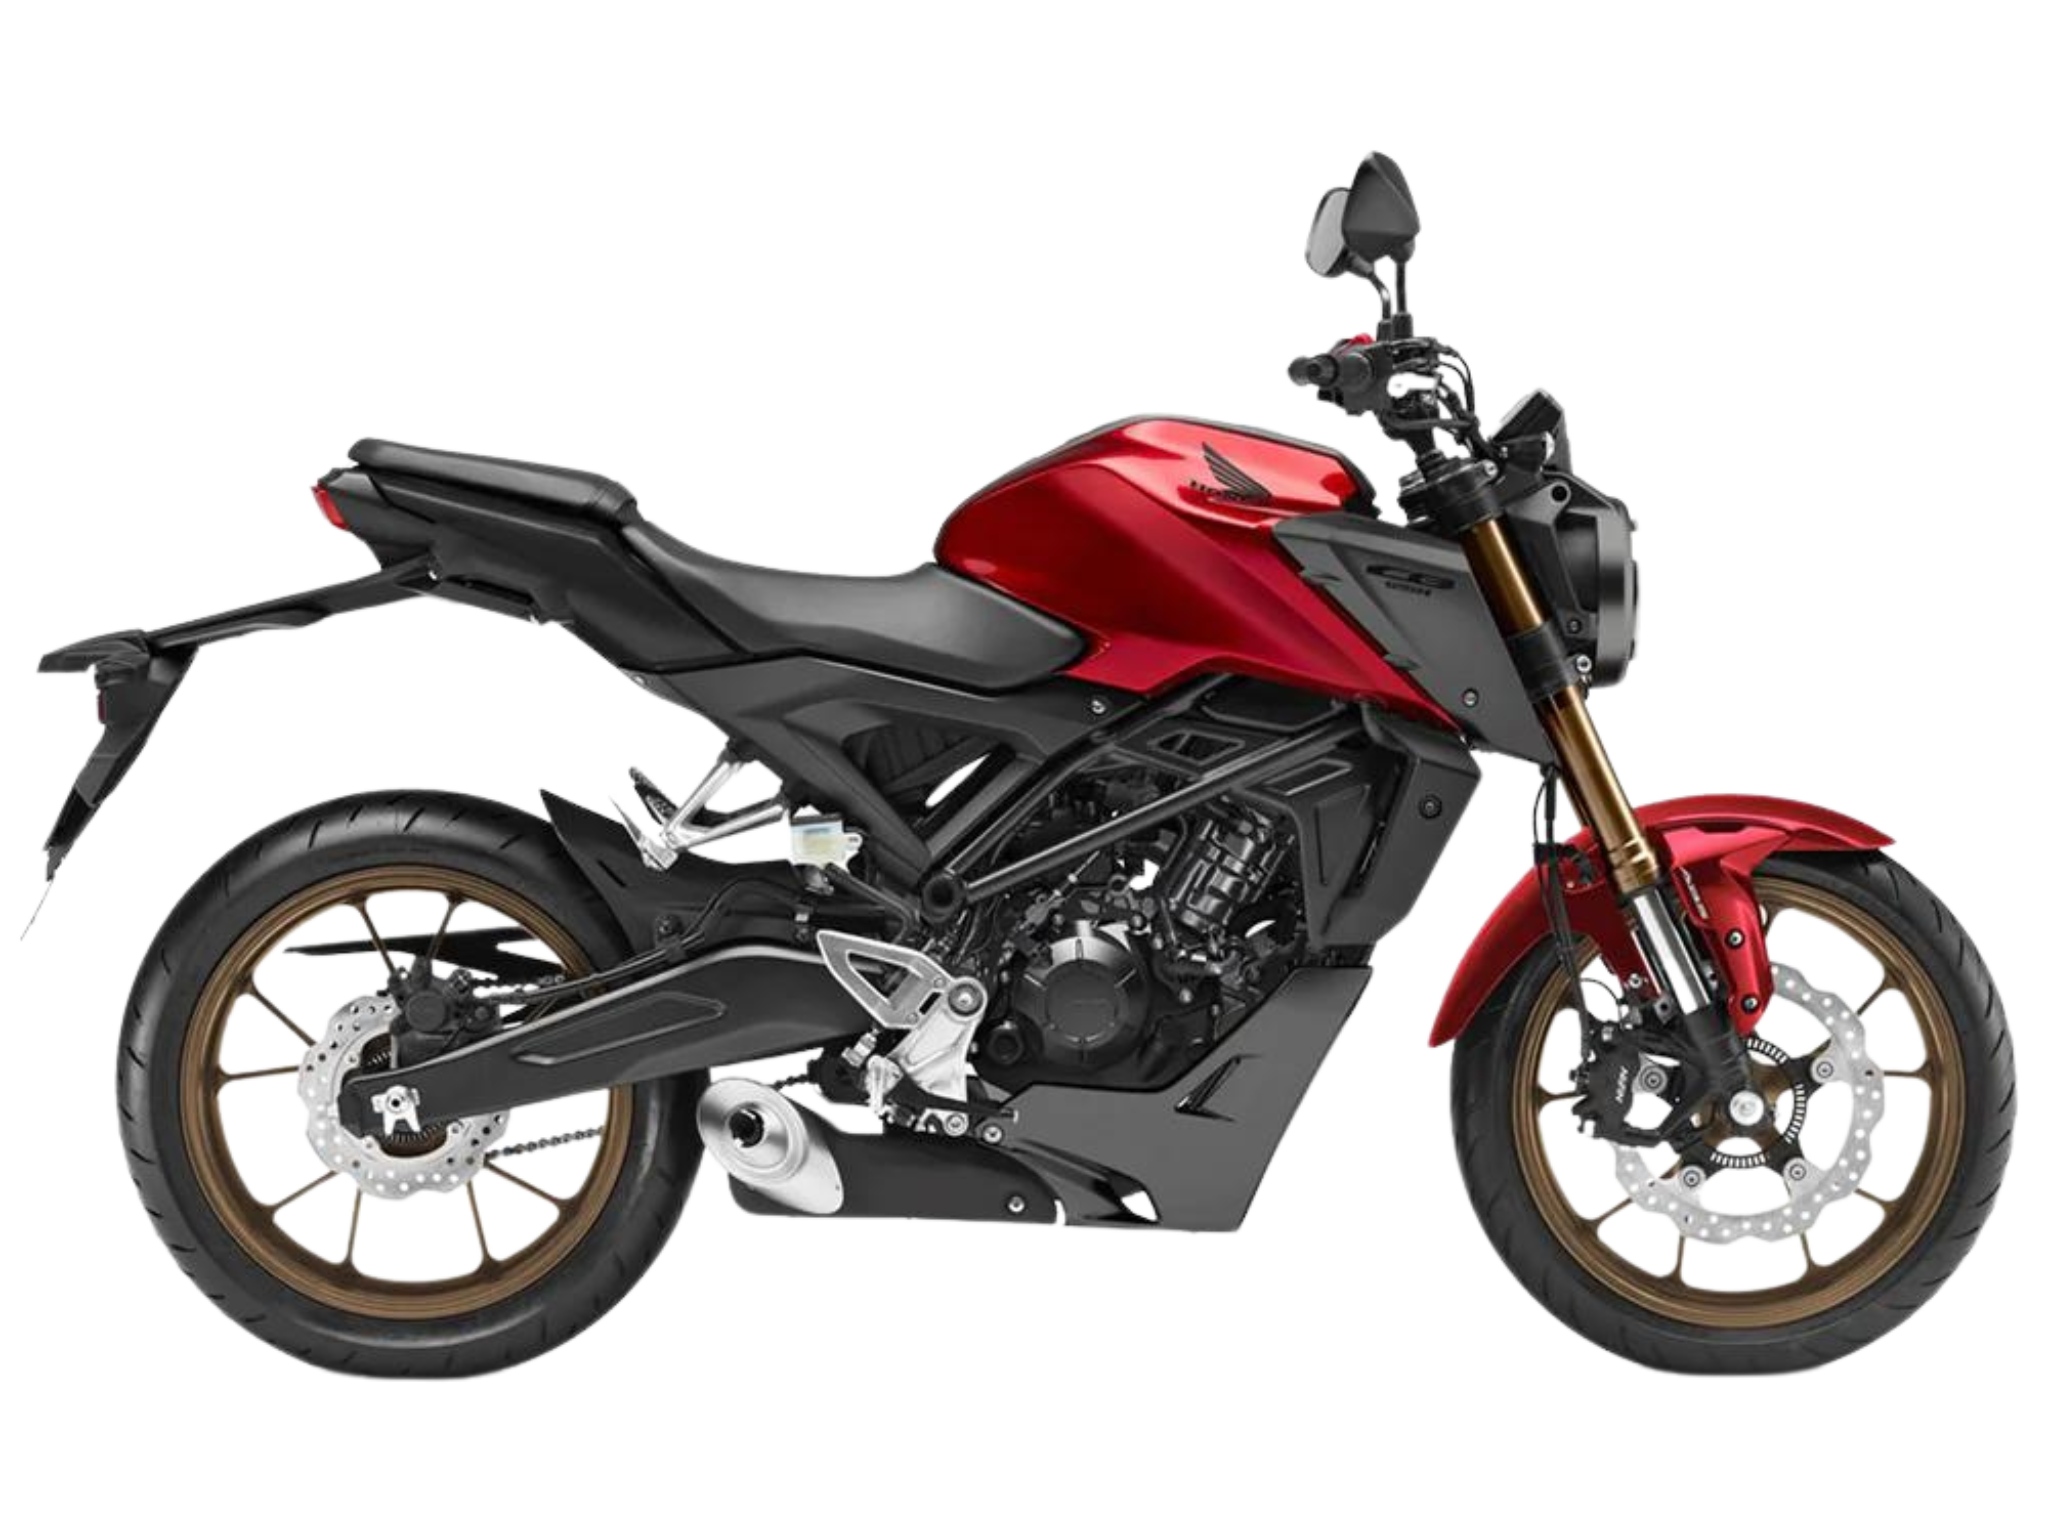 Opinion on the new Voge 525dsx or Voge itself : r/motorcycles